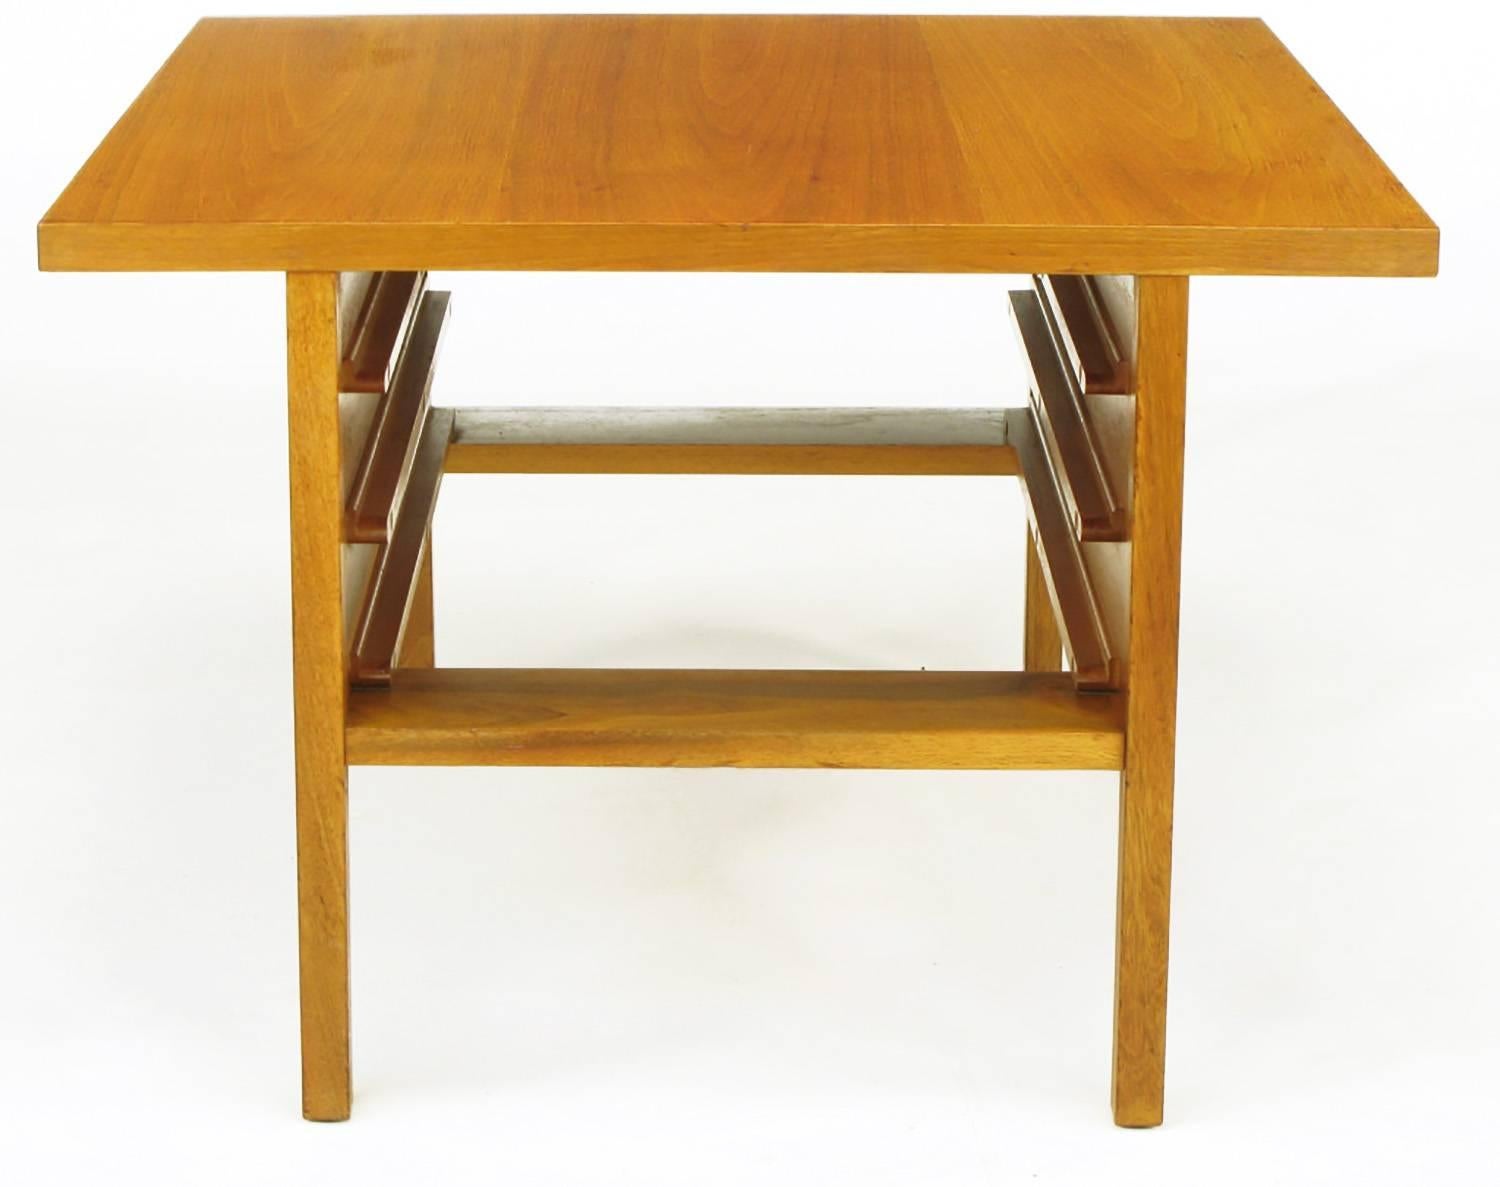 John Keal Walnut Coffee Table with Three Folding Side Tables In Good Condition For Sale In Chicago, IL